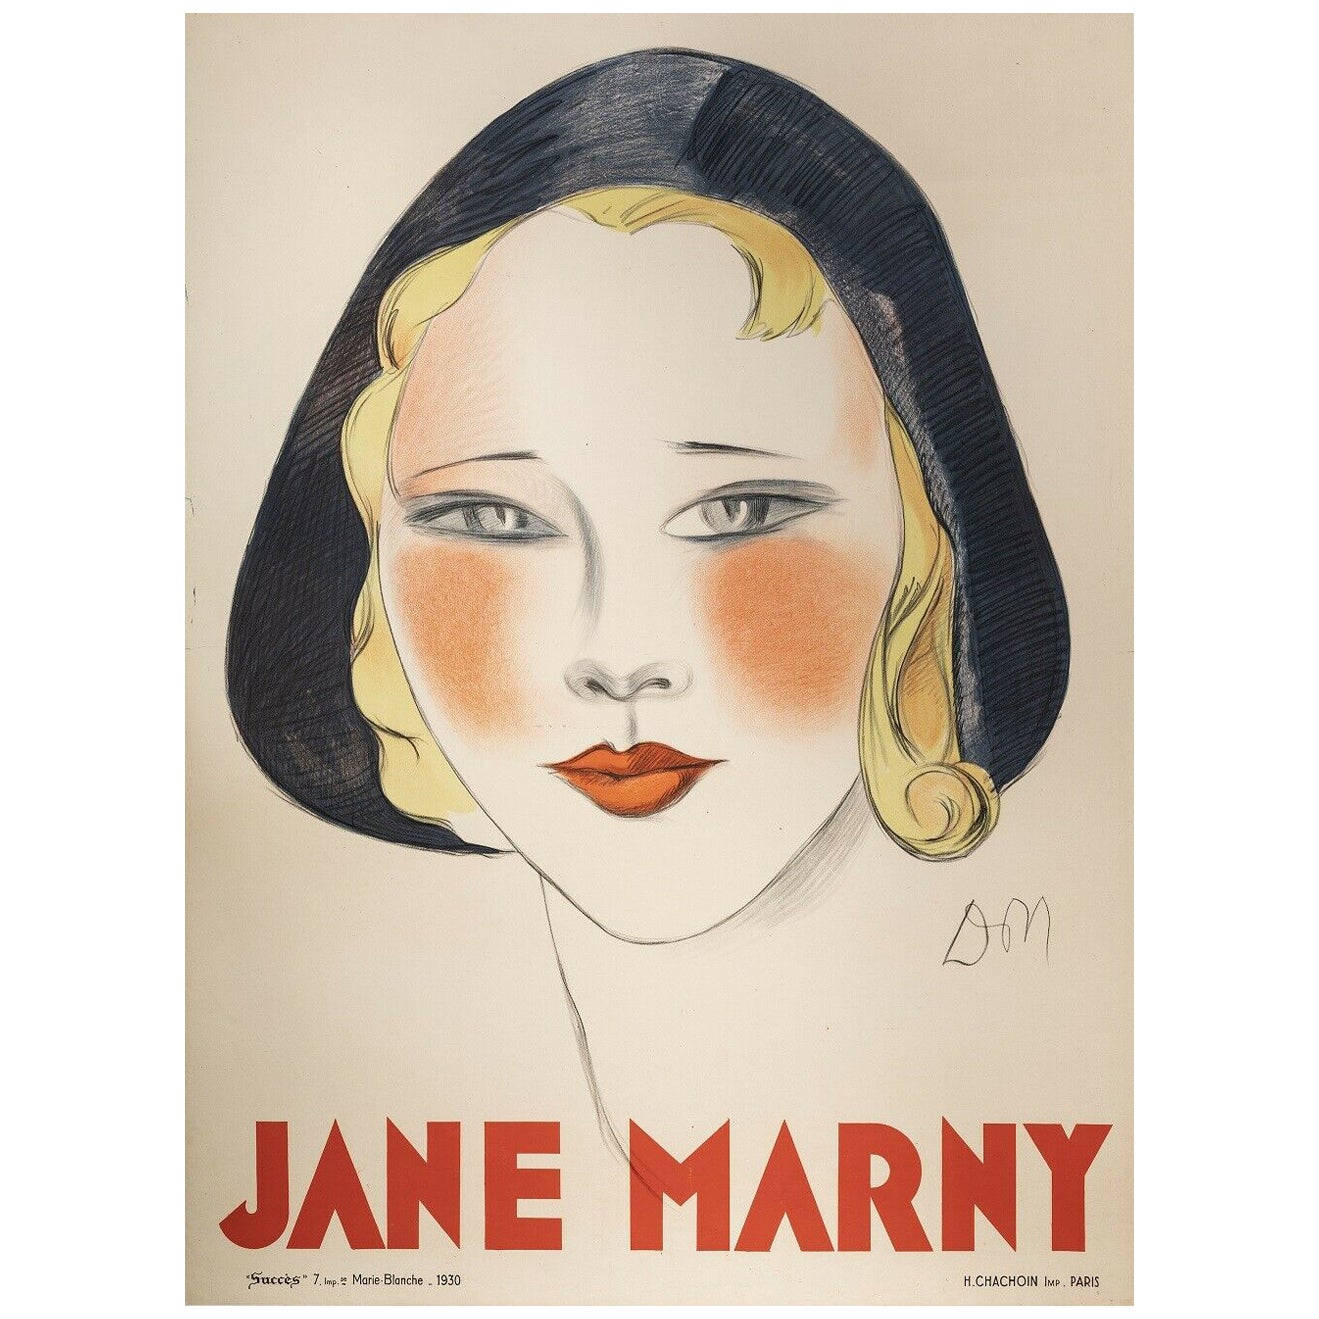 Original Art Deco Poster-Jean Don-Jane Marny-Actress -France, 1930 For Sale  at 1stDibs